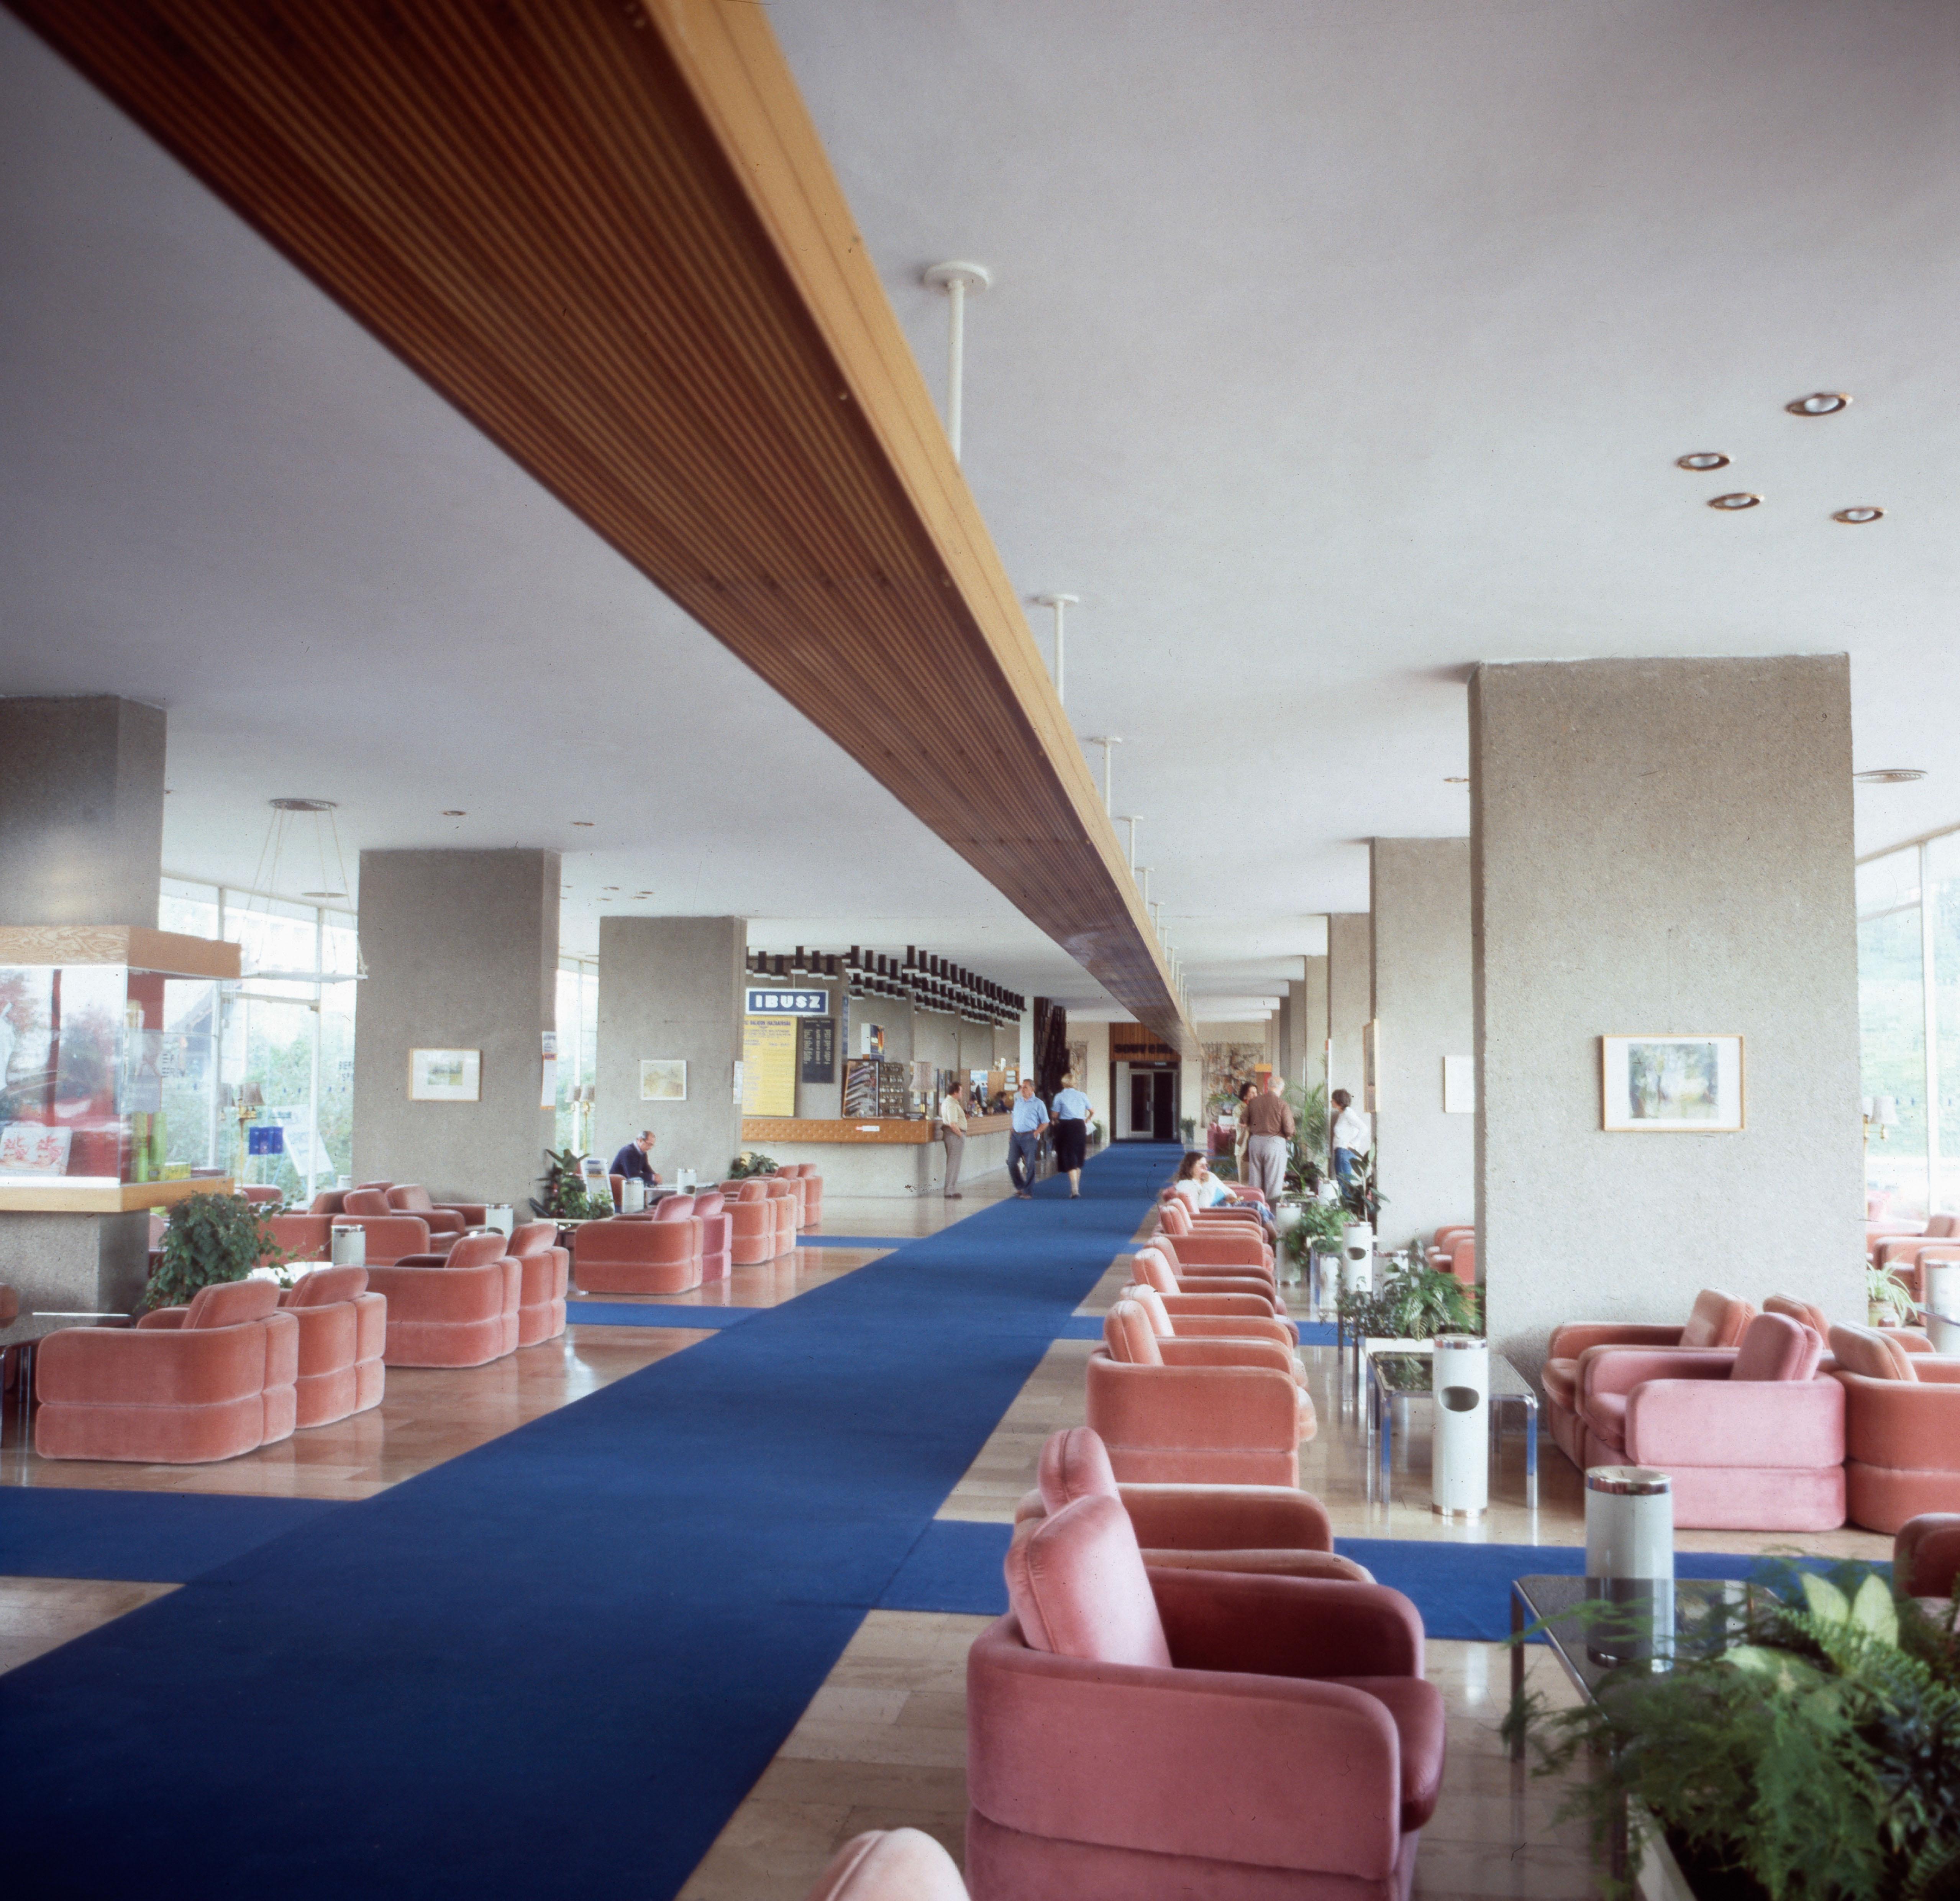 Walter Rudolph Black and White Photograph - Retro Hotel Lobby of the 1970ies, Limited Edition, Printed Later